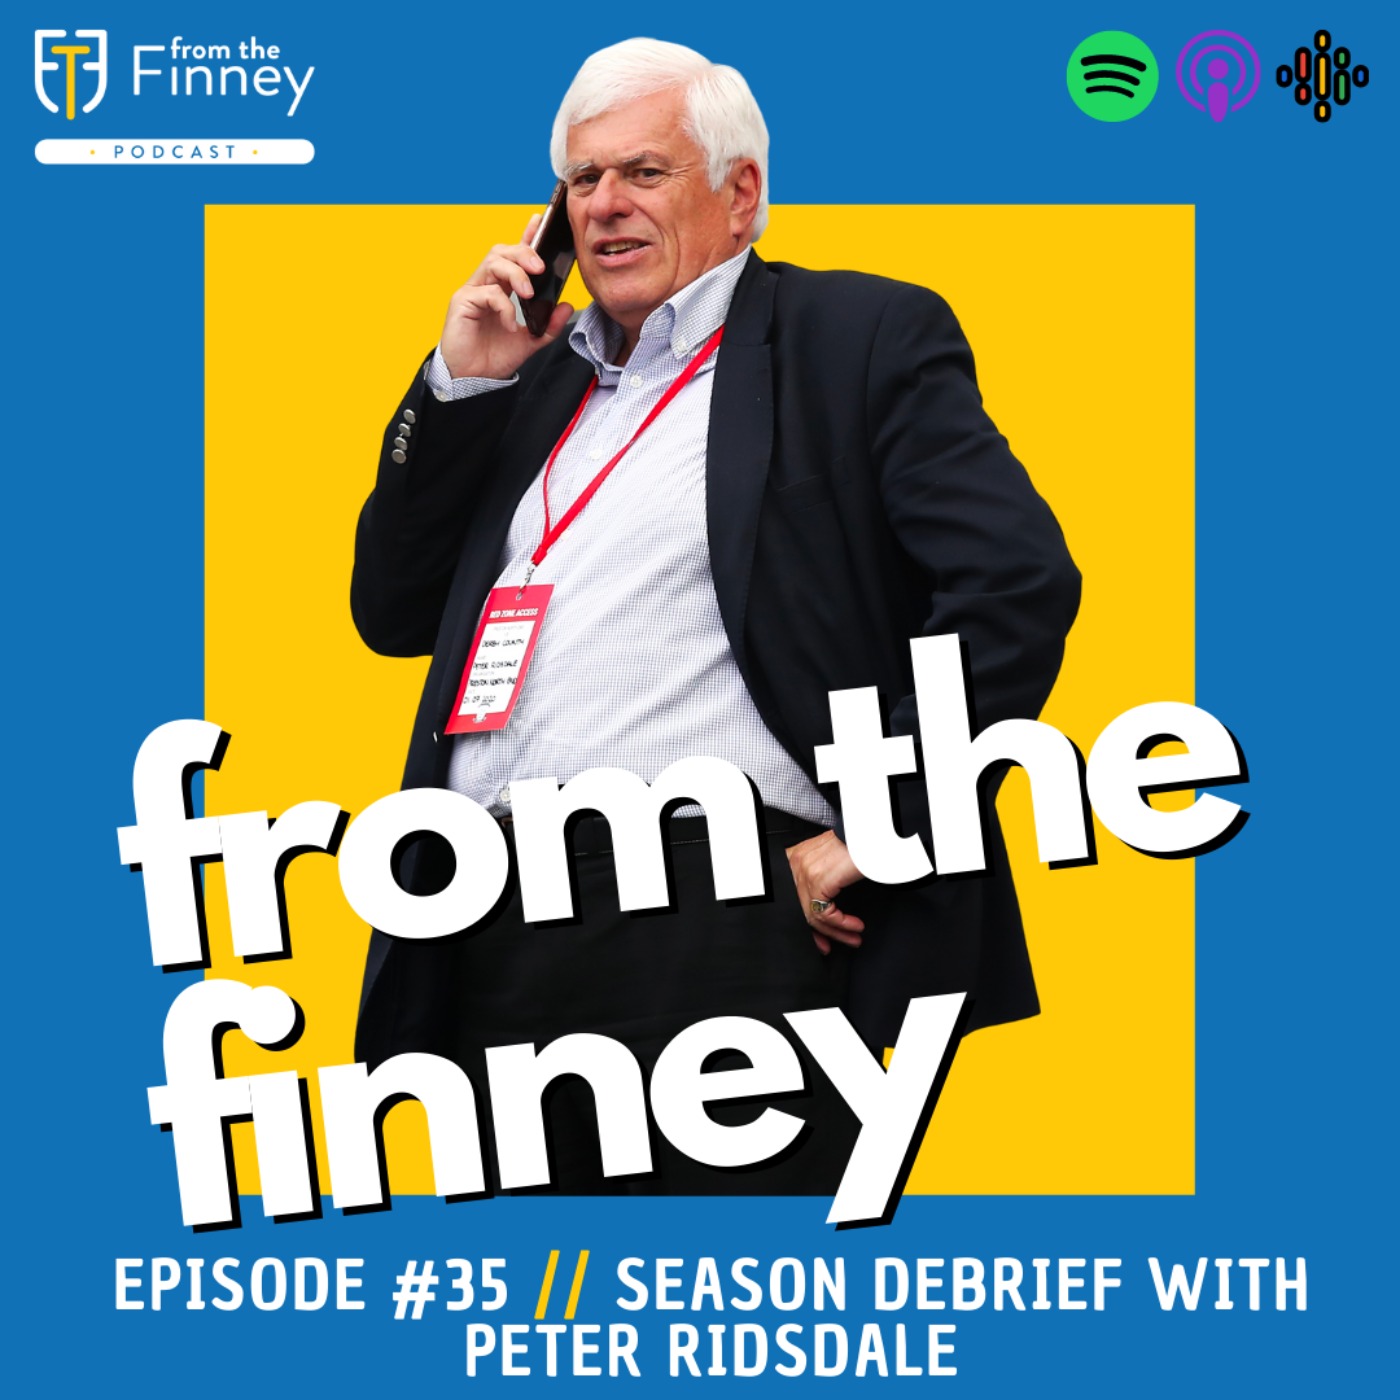 Episode #35 // Season Debrief with Peter Ridsdale // From the Finney